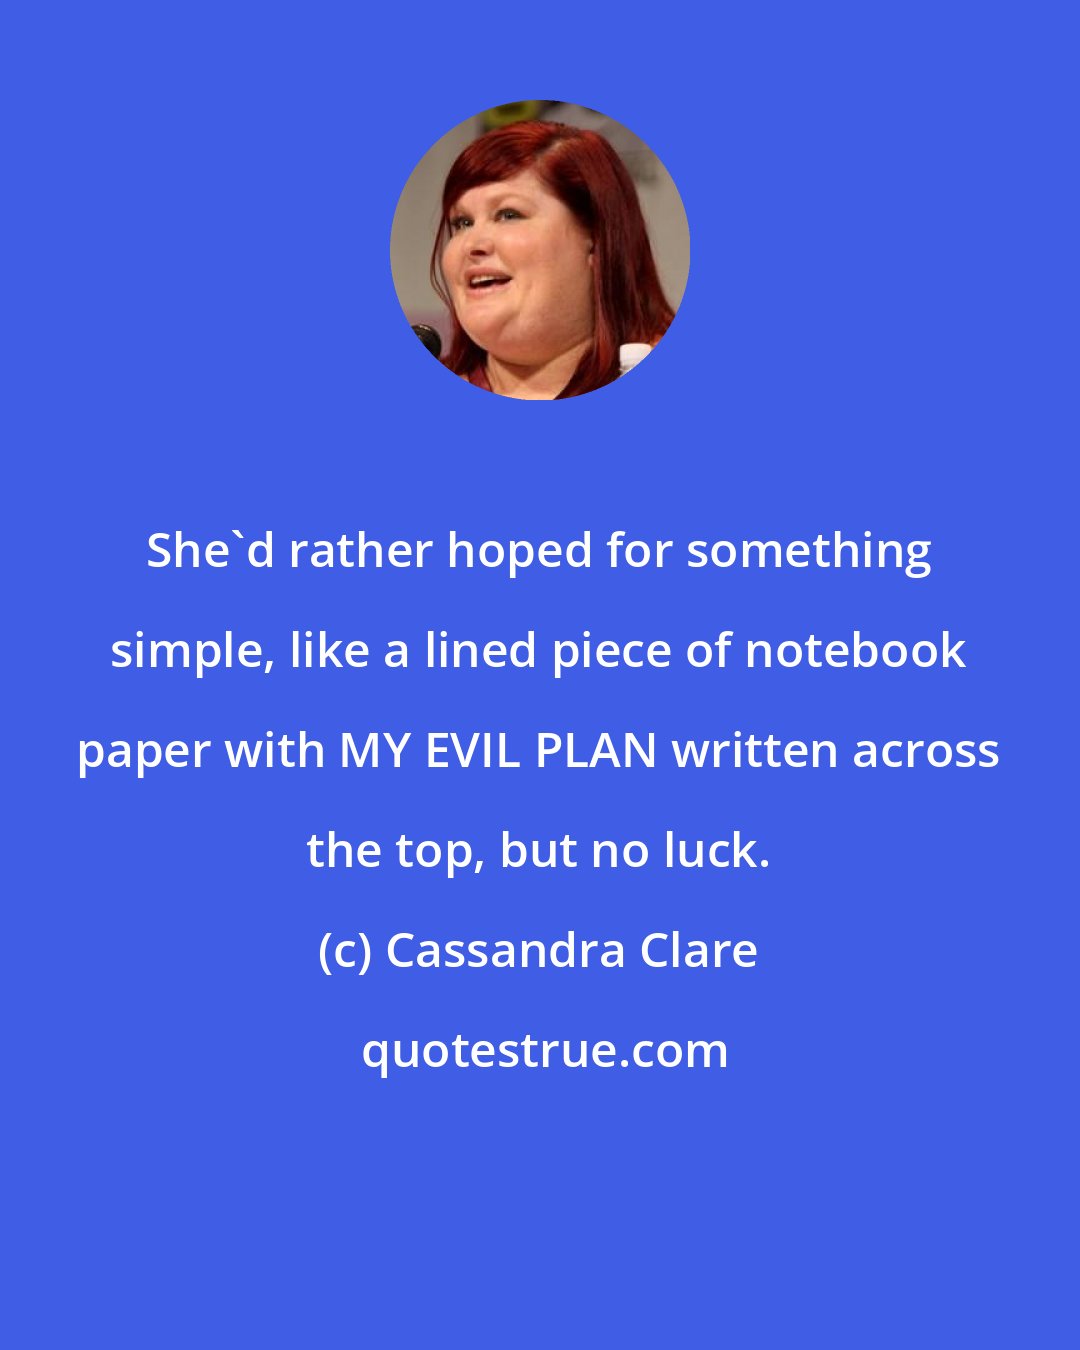 Cassandra Clare: She'd rather hoped for something simple, like a lined piece of notebook paper with MY EVIL PLAN written across the top, but no luck.